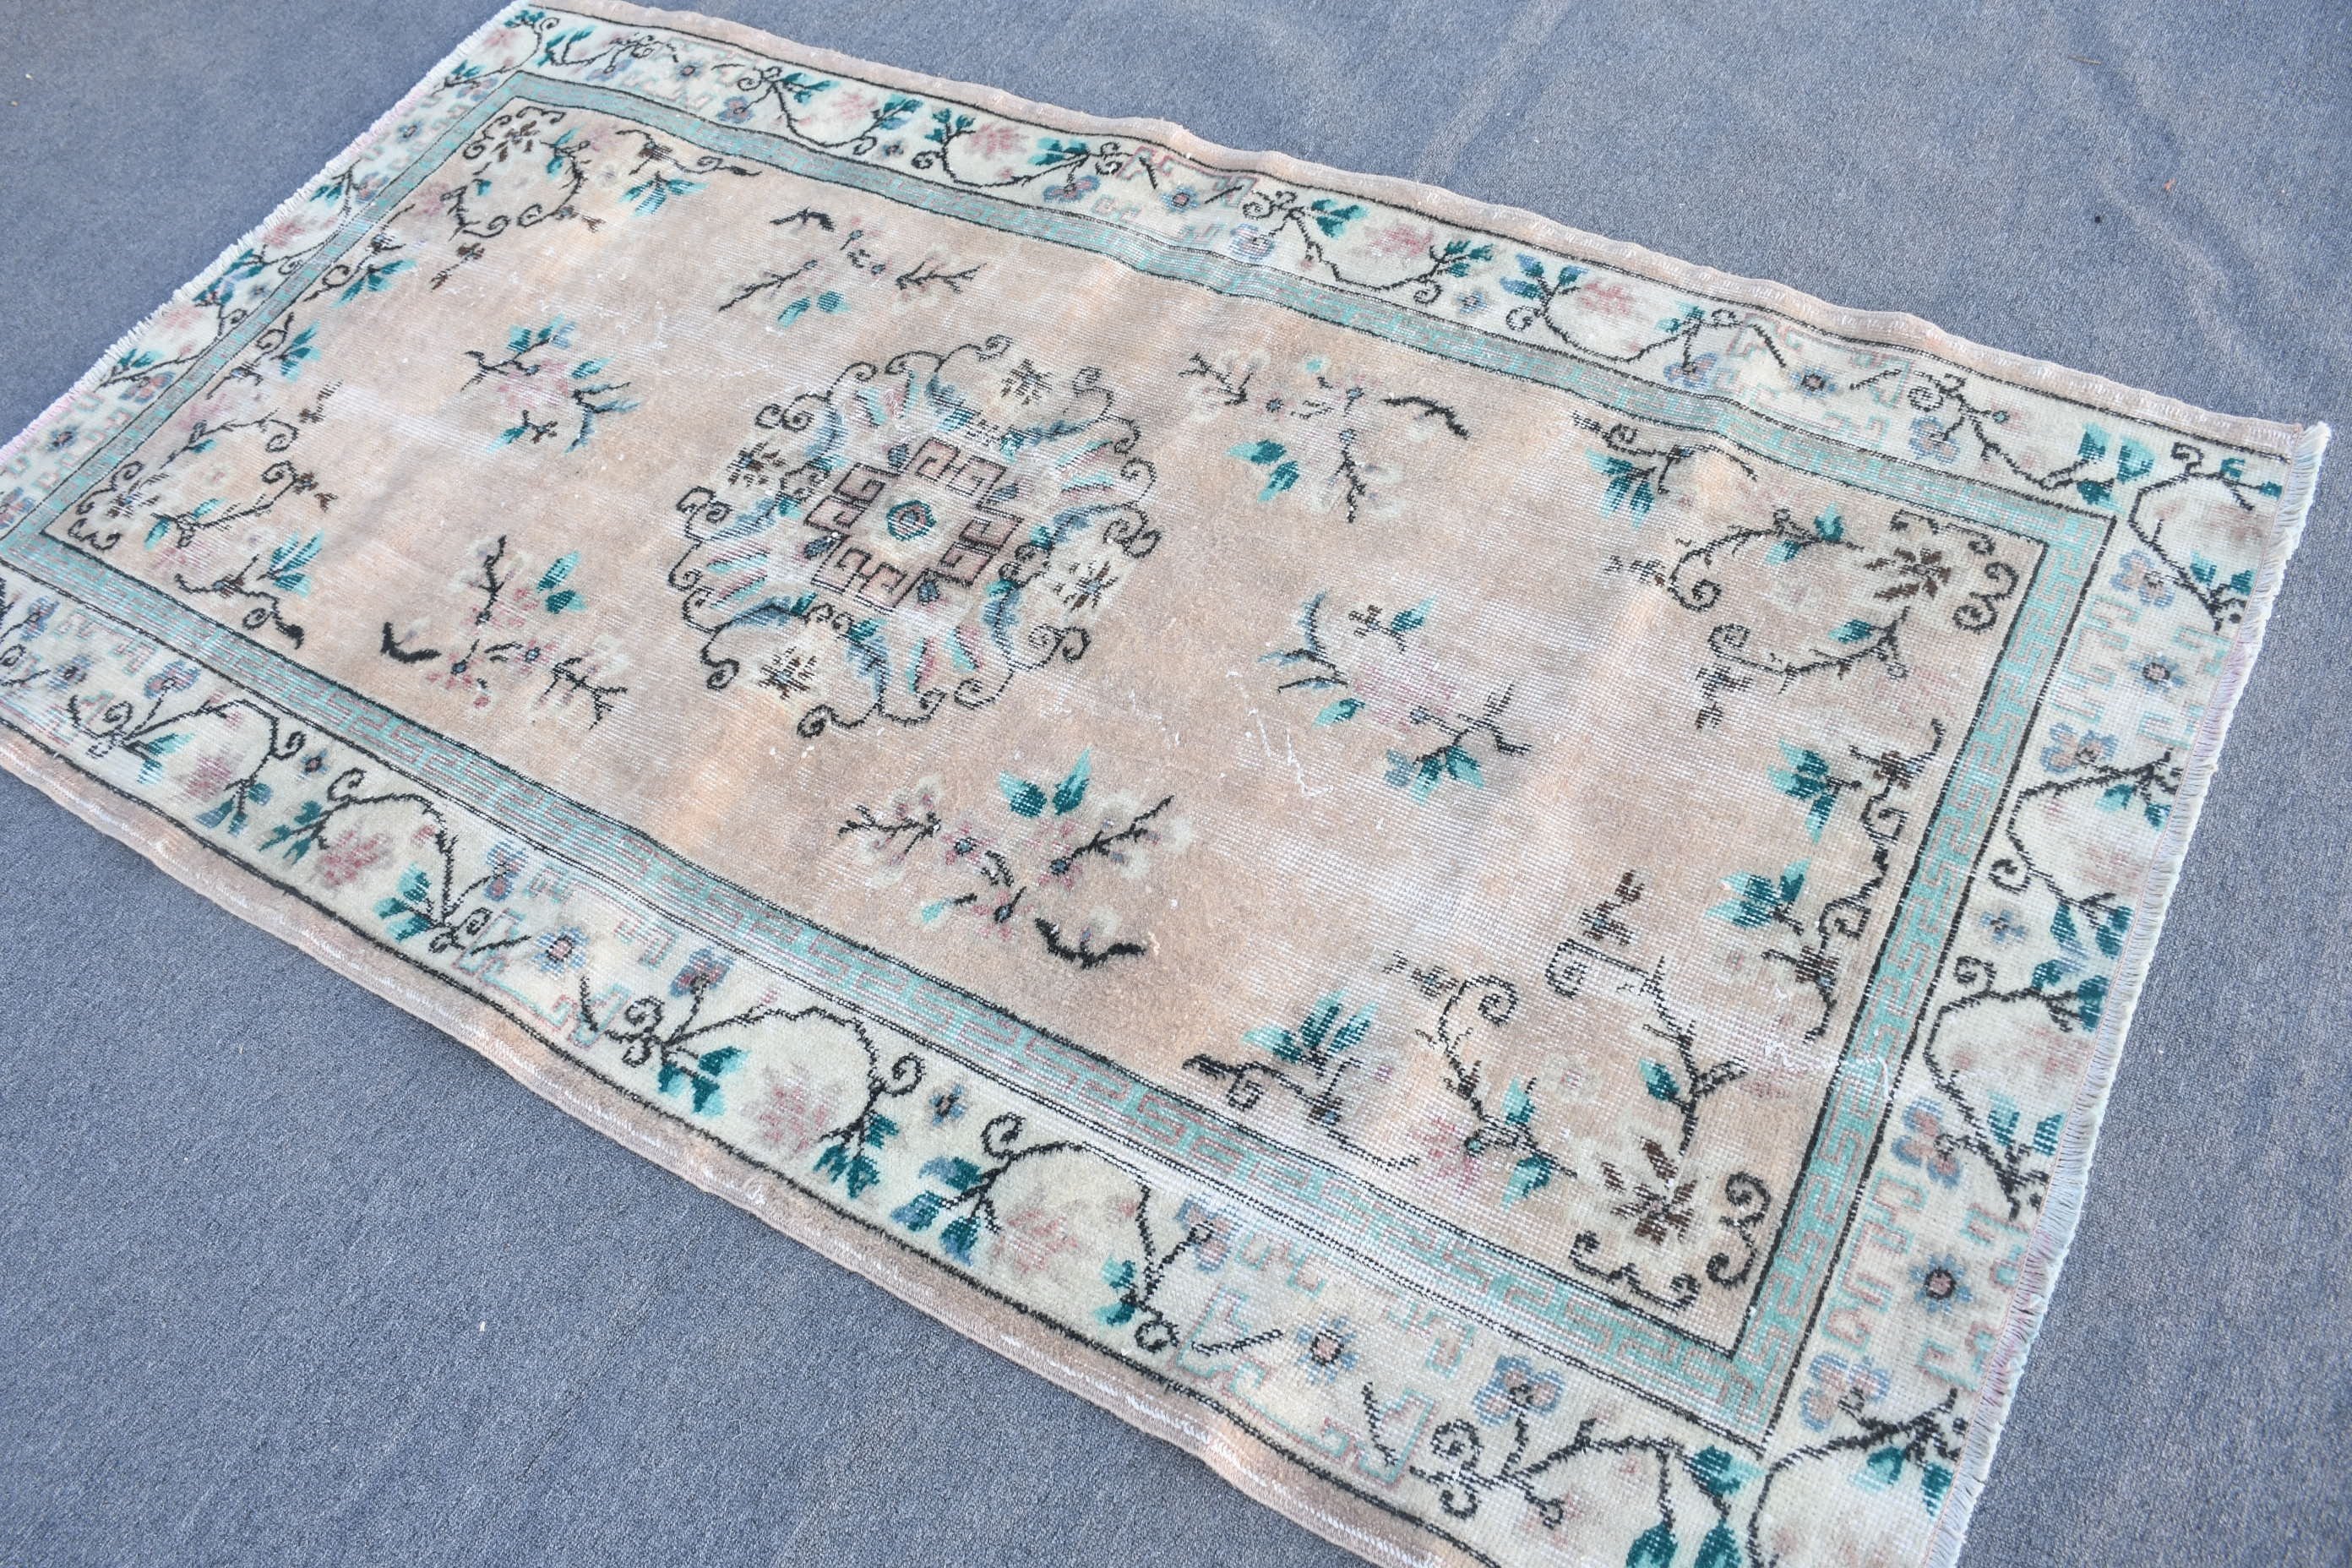 Home Decor Rugs, Vintage Rugs, Turkish Rug, Rugs for Kitchen, Oushak Rug, 3.8x6.7 ft Area Rug, Green Cool Rugs, Indoor Rugs, Bedroom Rugs